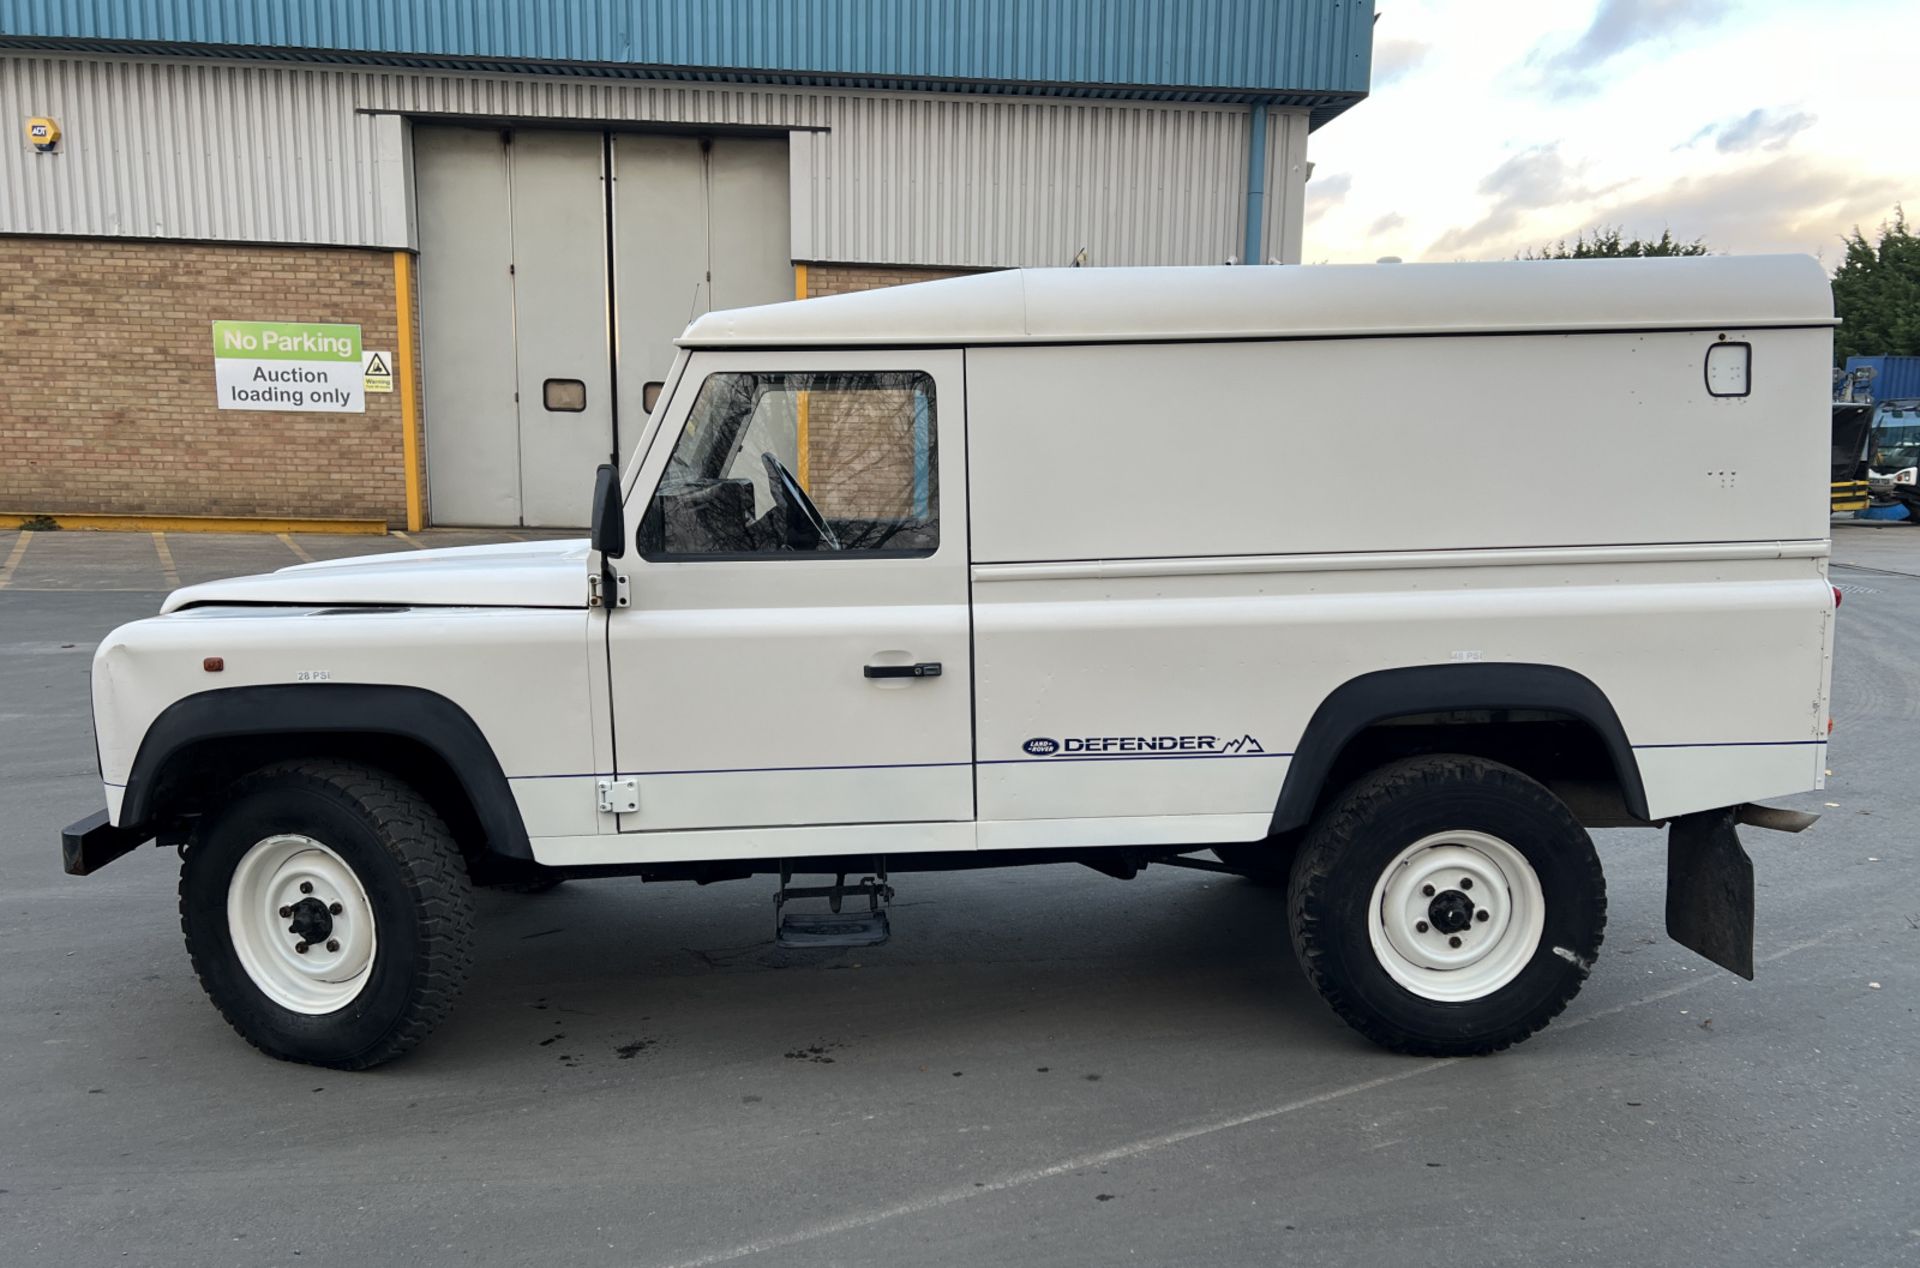 Land Rover Defender 110TDI - 1995 - Very low mileage at 24095 miles - 2.5L diesel - white - Image 4 of 49